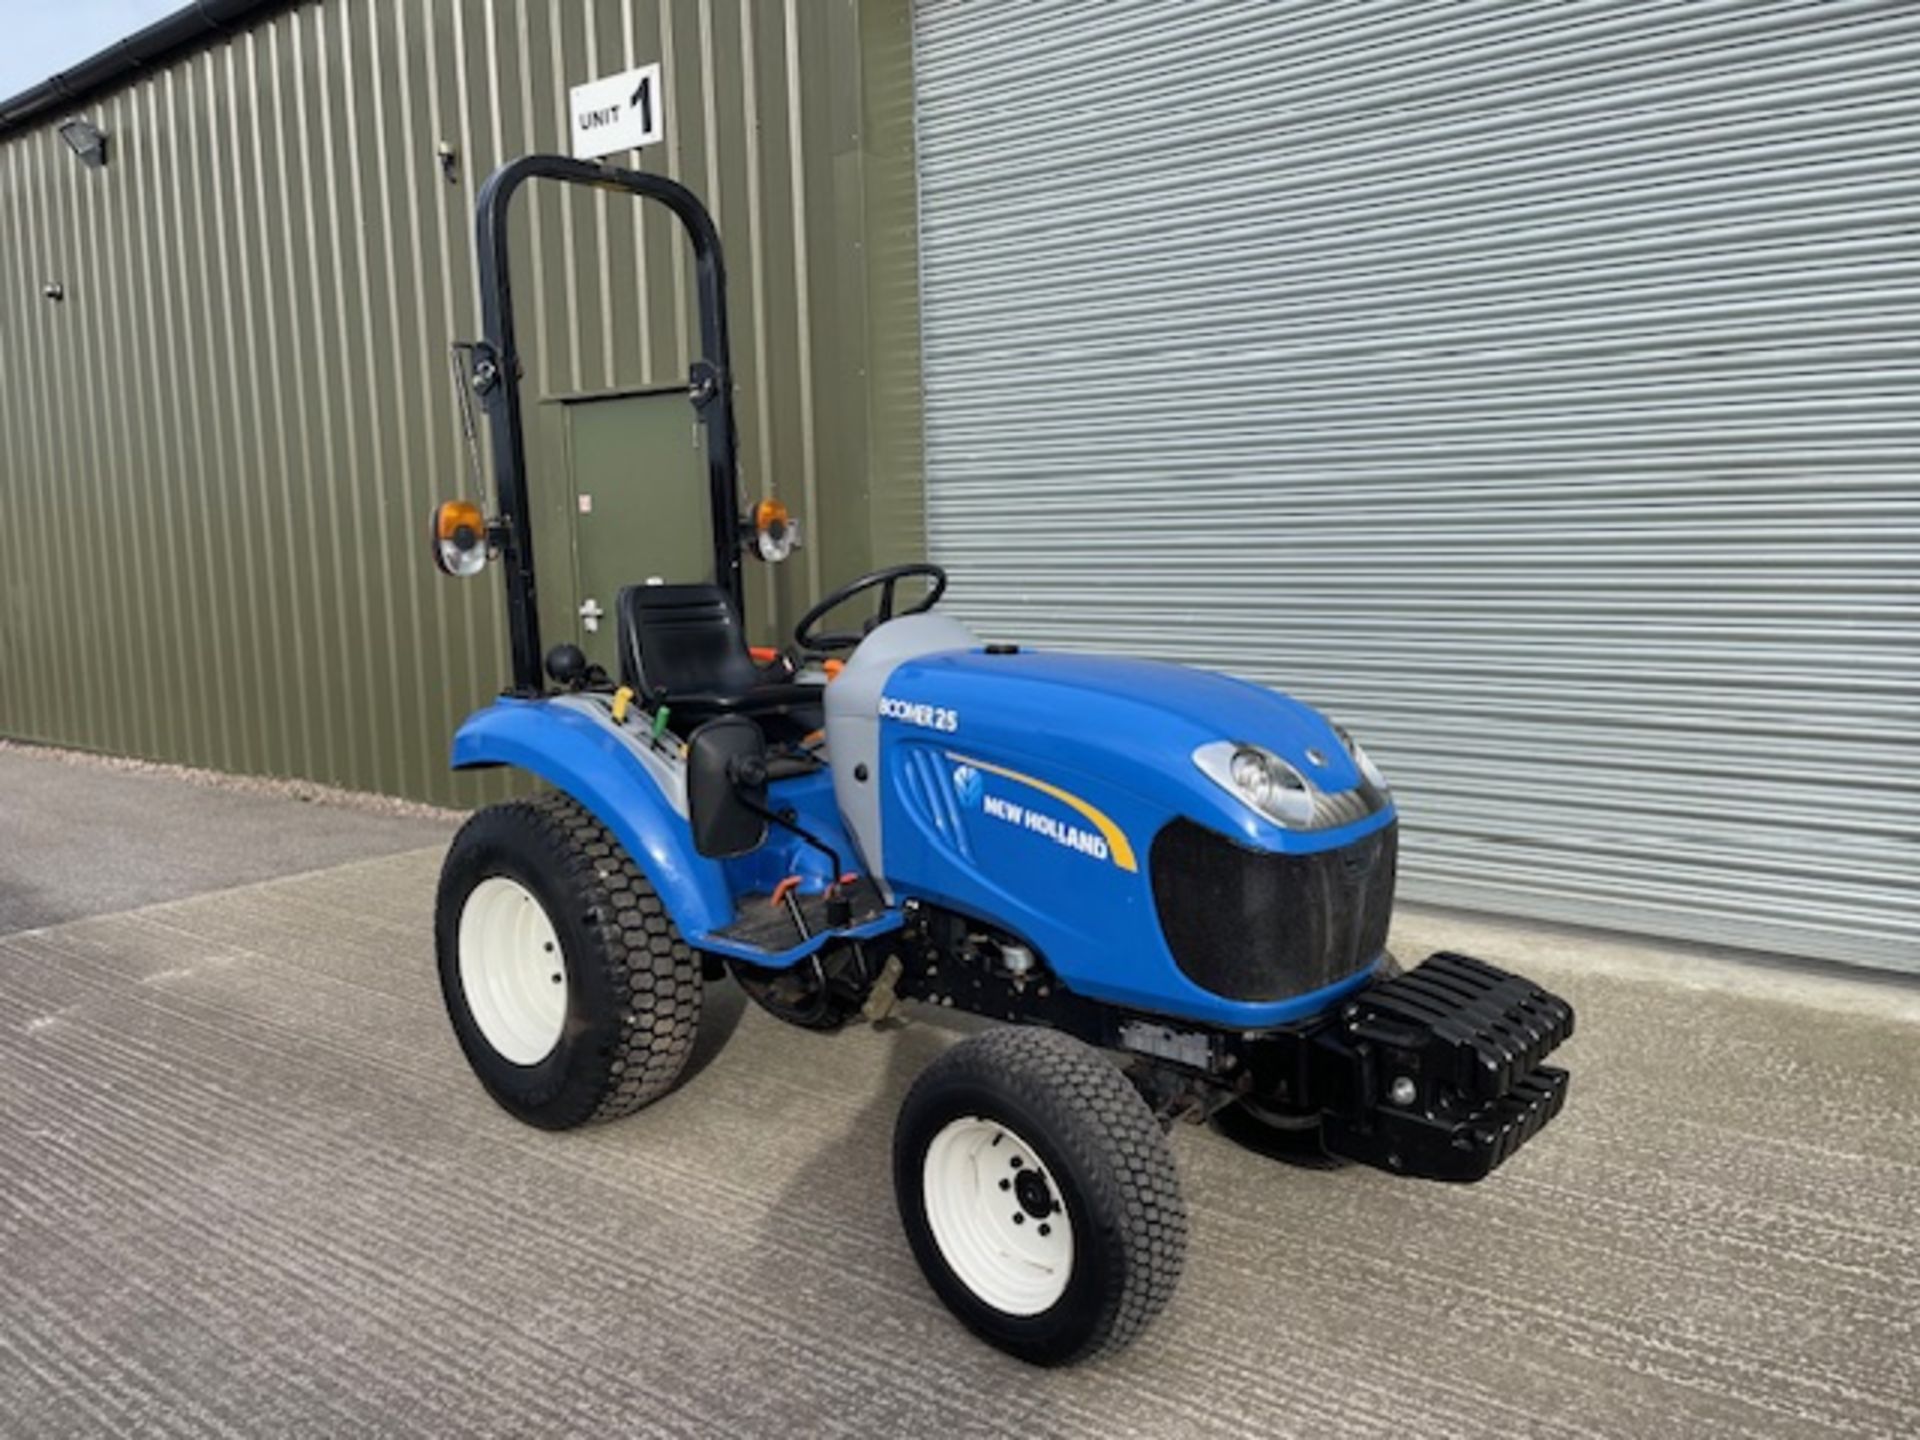 2019, NEW HOLLAND BOOMER 25 COMPACT TRACTOR - Image 2 of 11